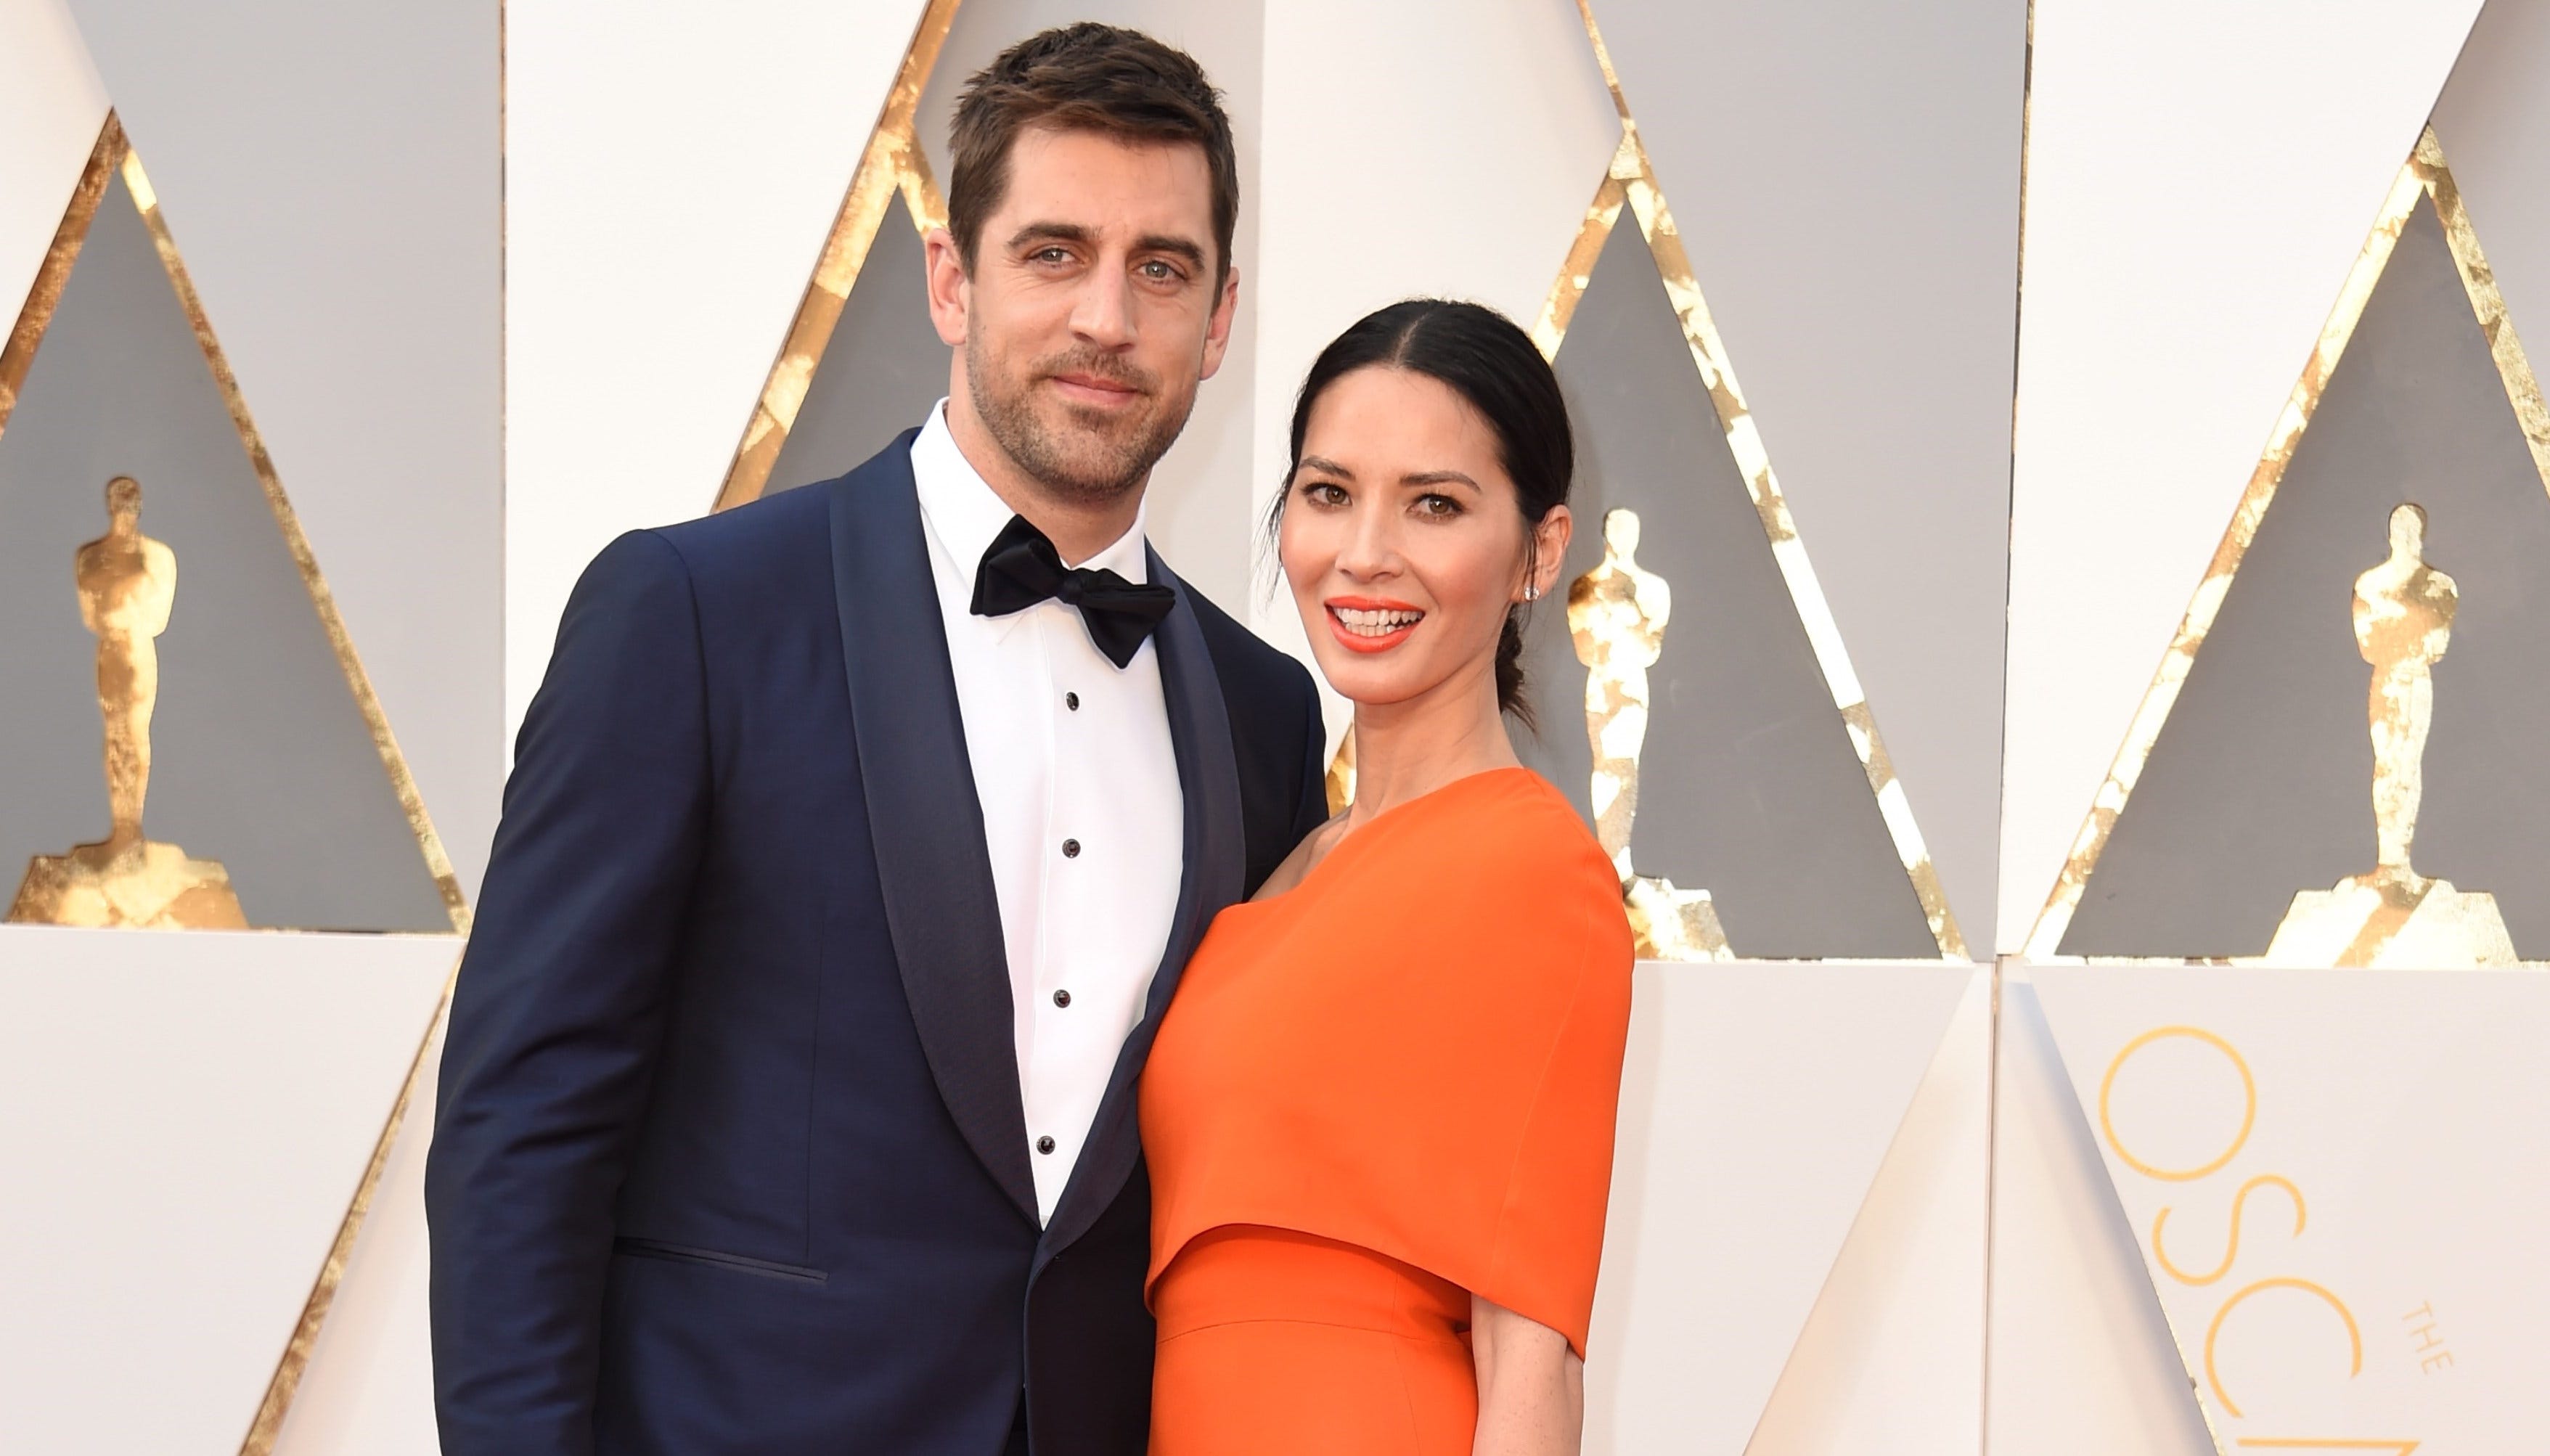 Olivia Munn opened up about Aaron Rodgers' family